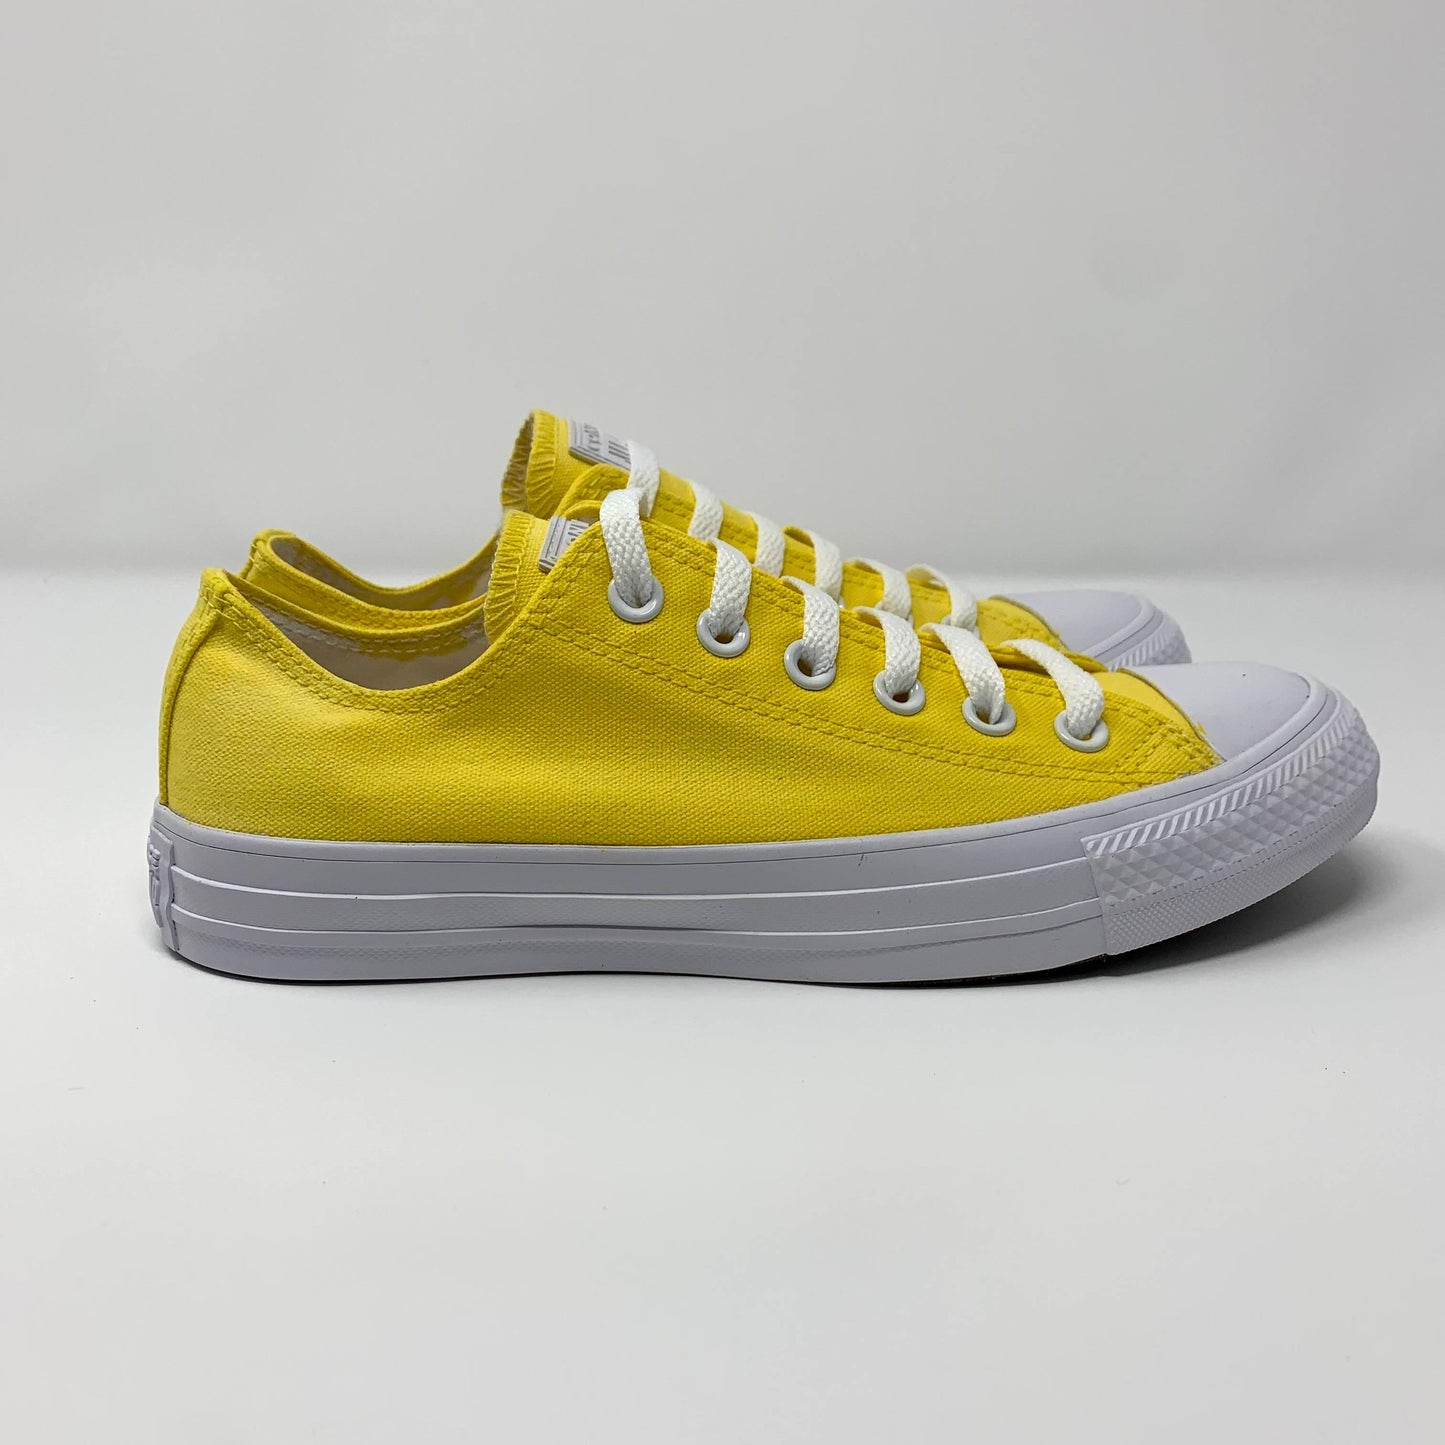 Yellow Shoes - ButterMakesMeHappy